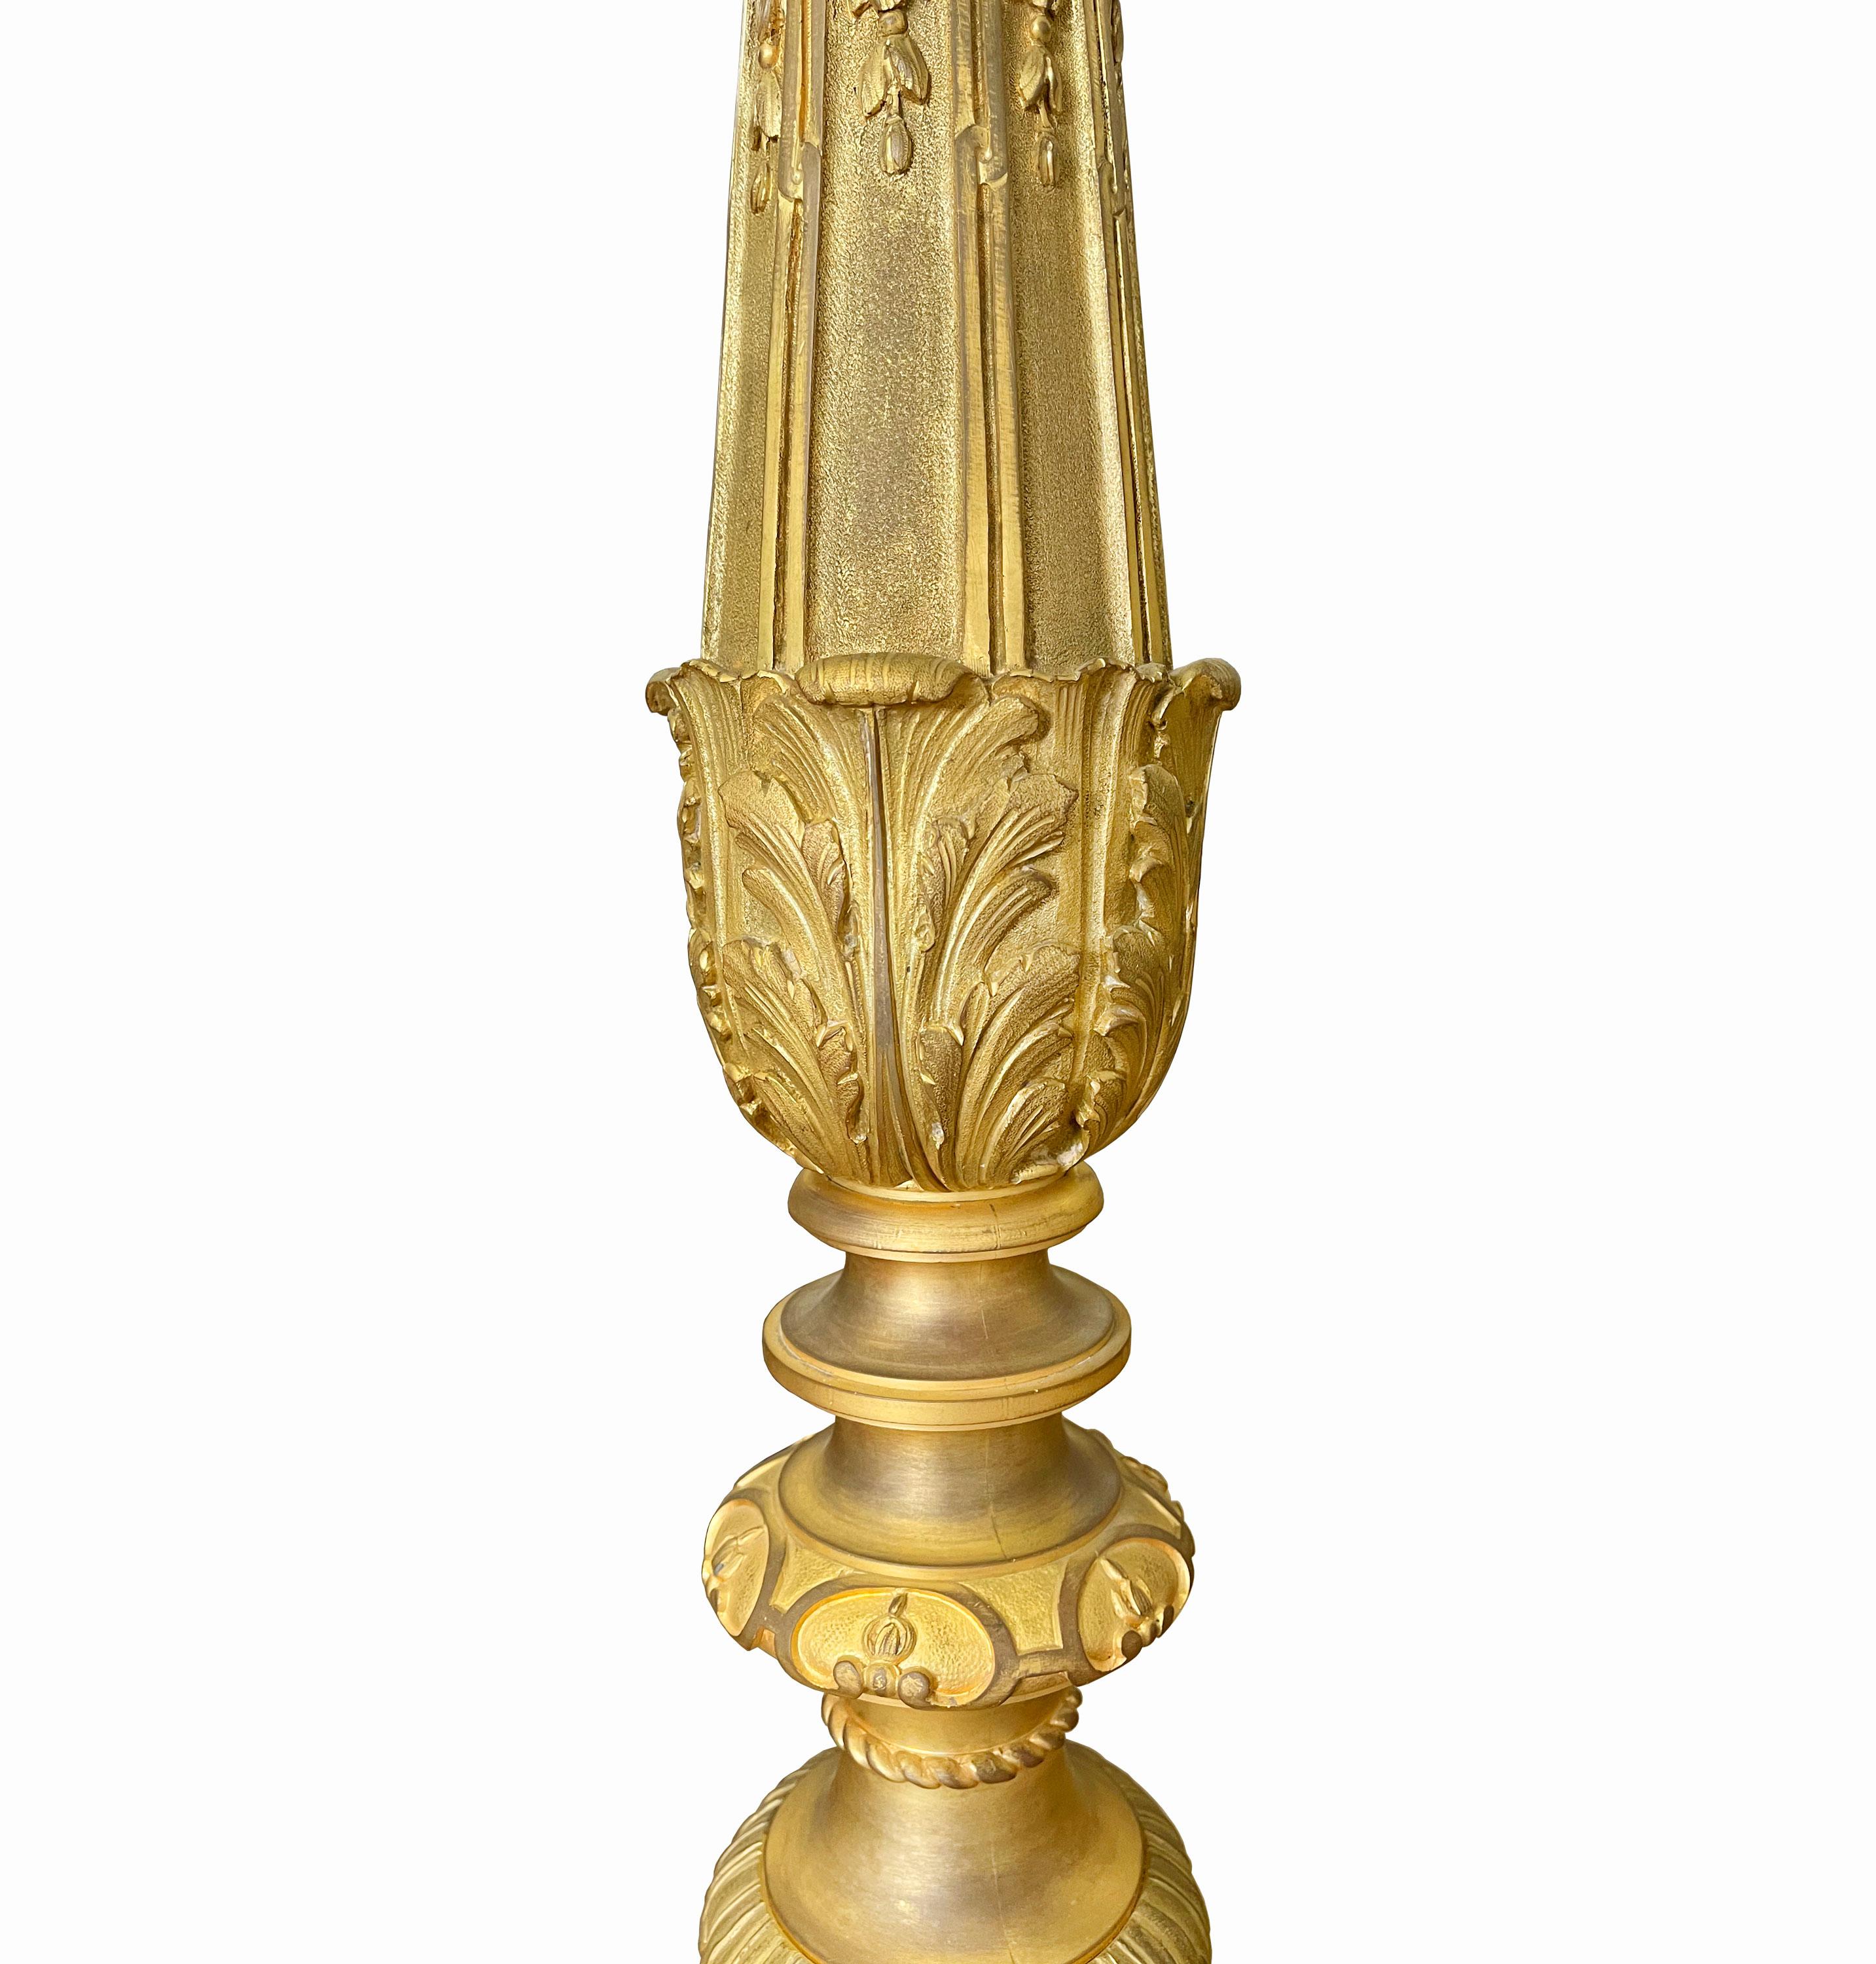 Cast 19th Century French Gilt Bronze Floor Lamp by Maison Millet